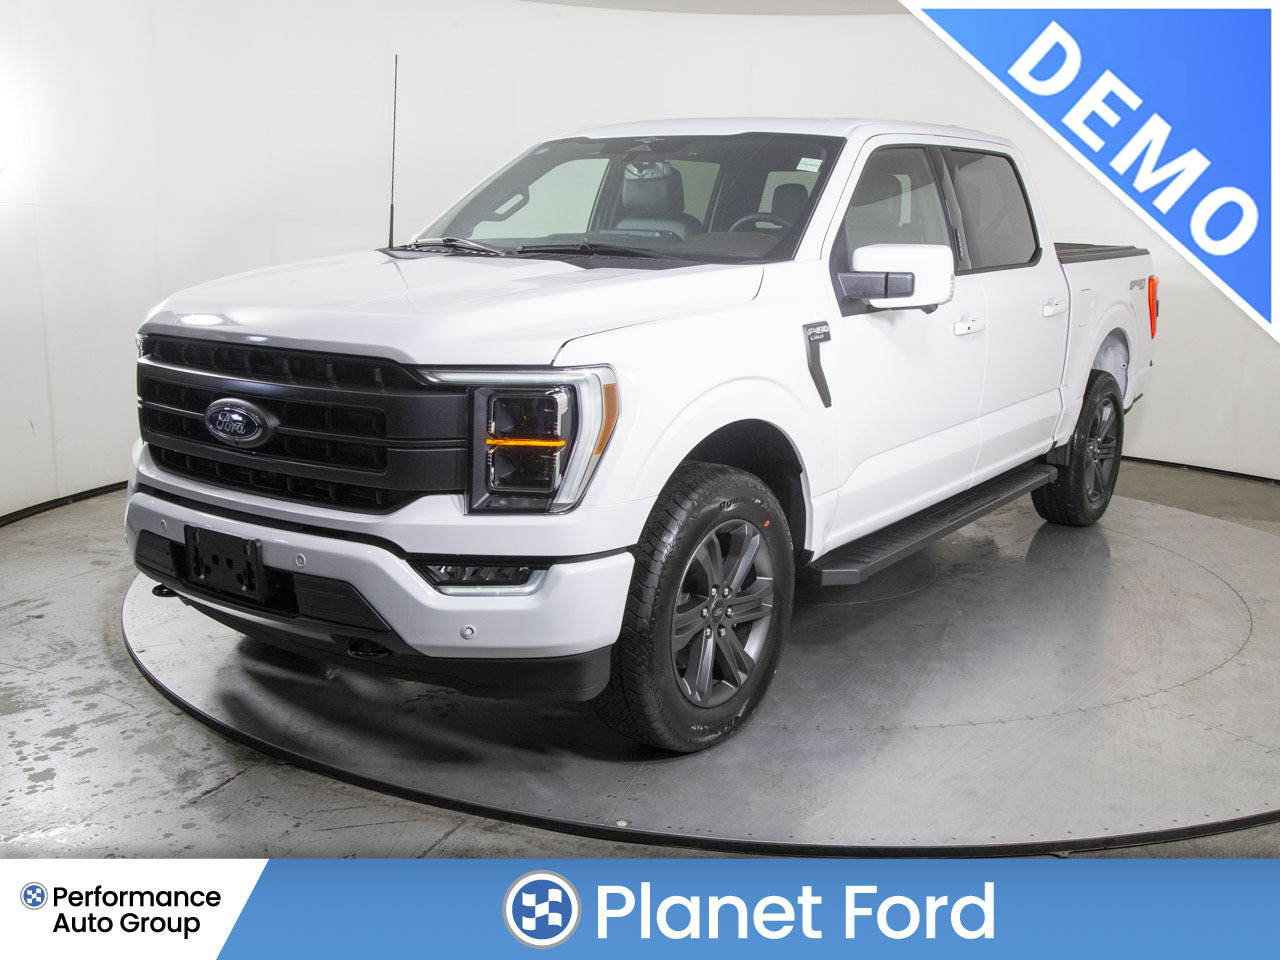 2023 Ford F-150 LARIAT 502A 3.5L V6 ROOF 360 CAMERA POWER TAILGATE